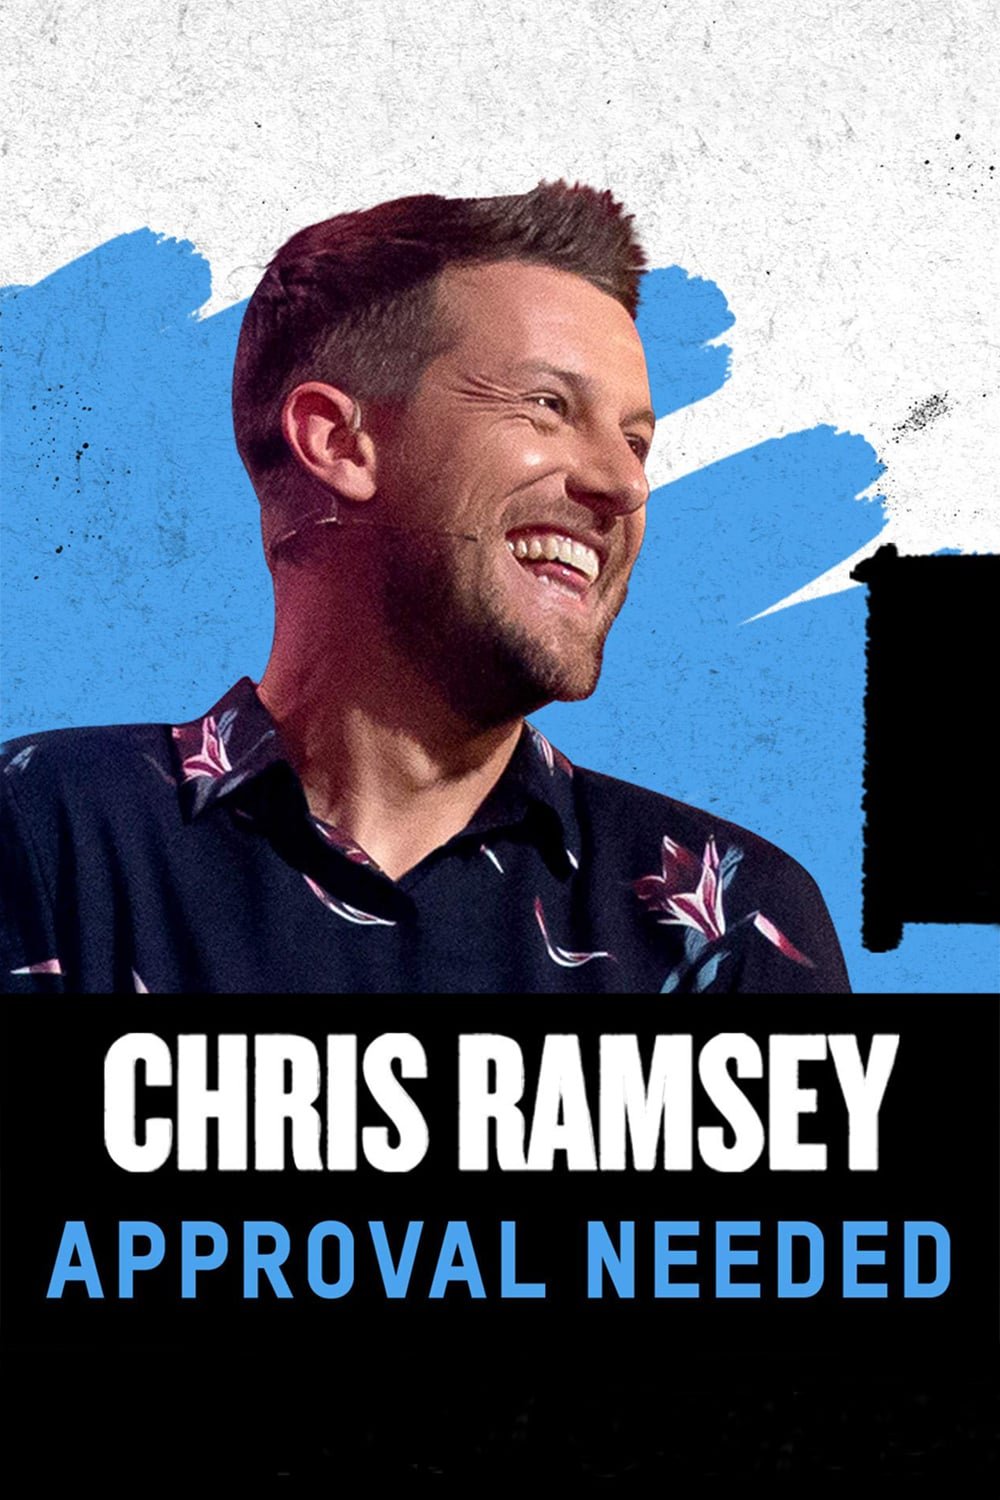 Poster of the movie Chris Ramsey Approval Needed